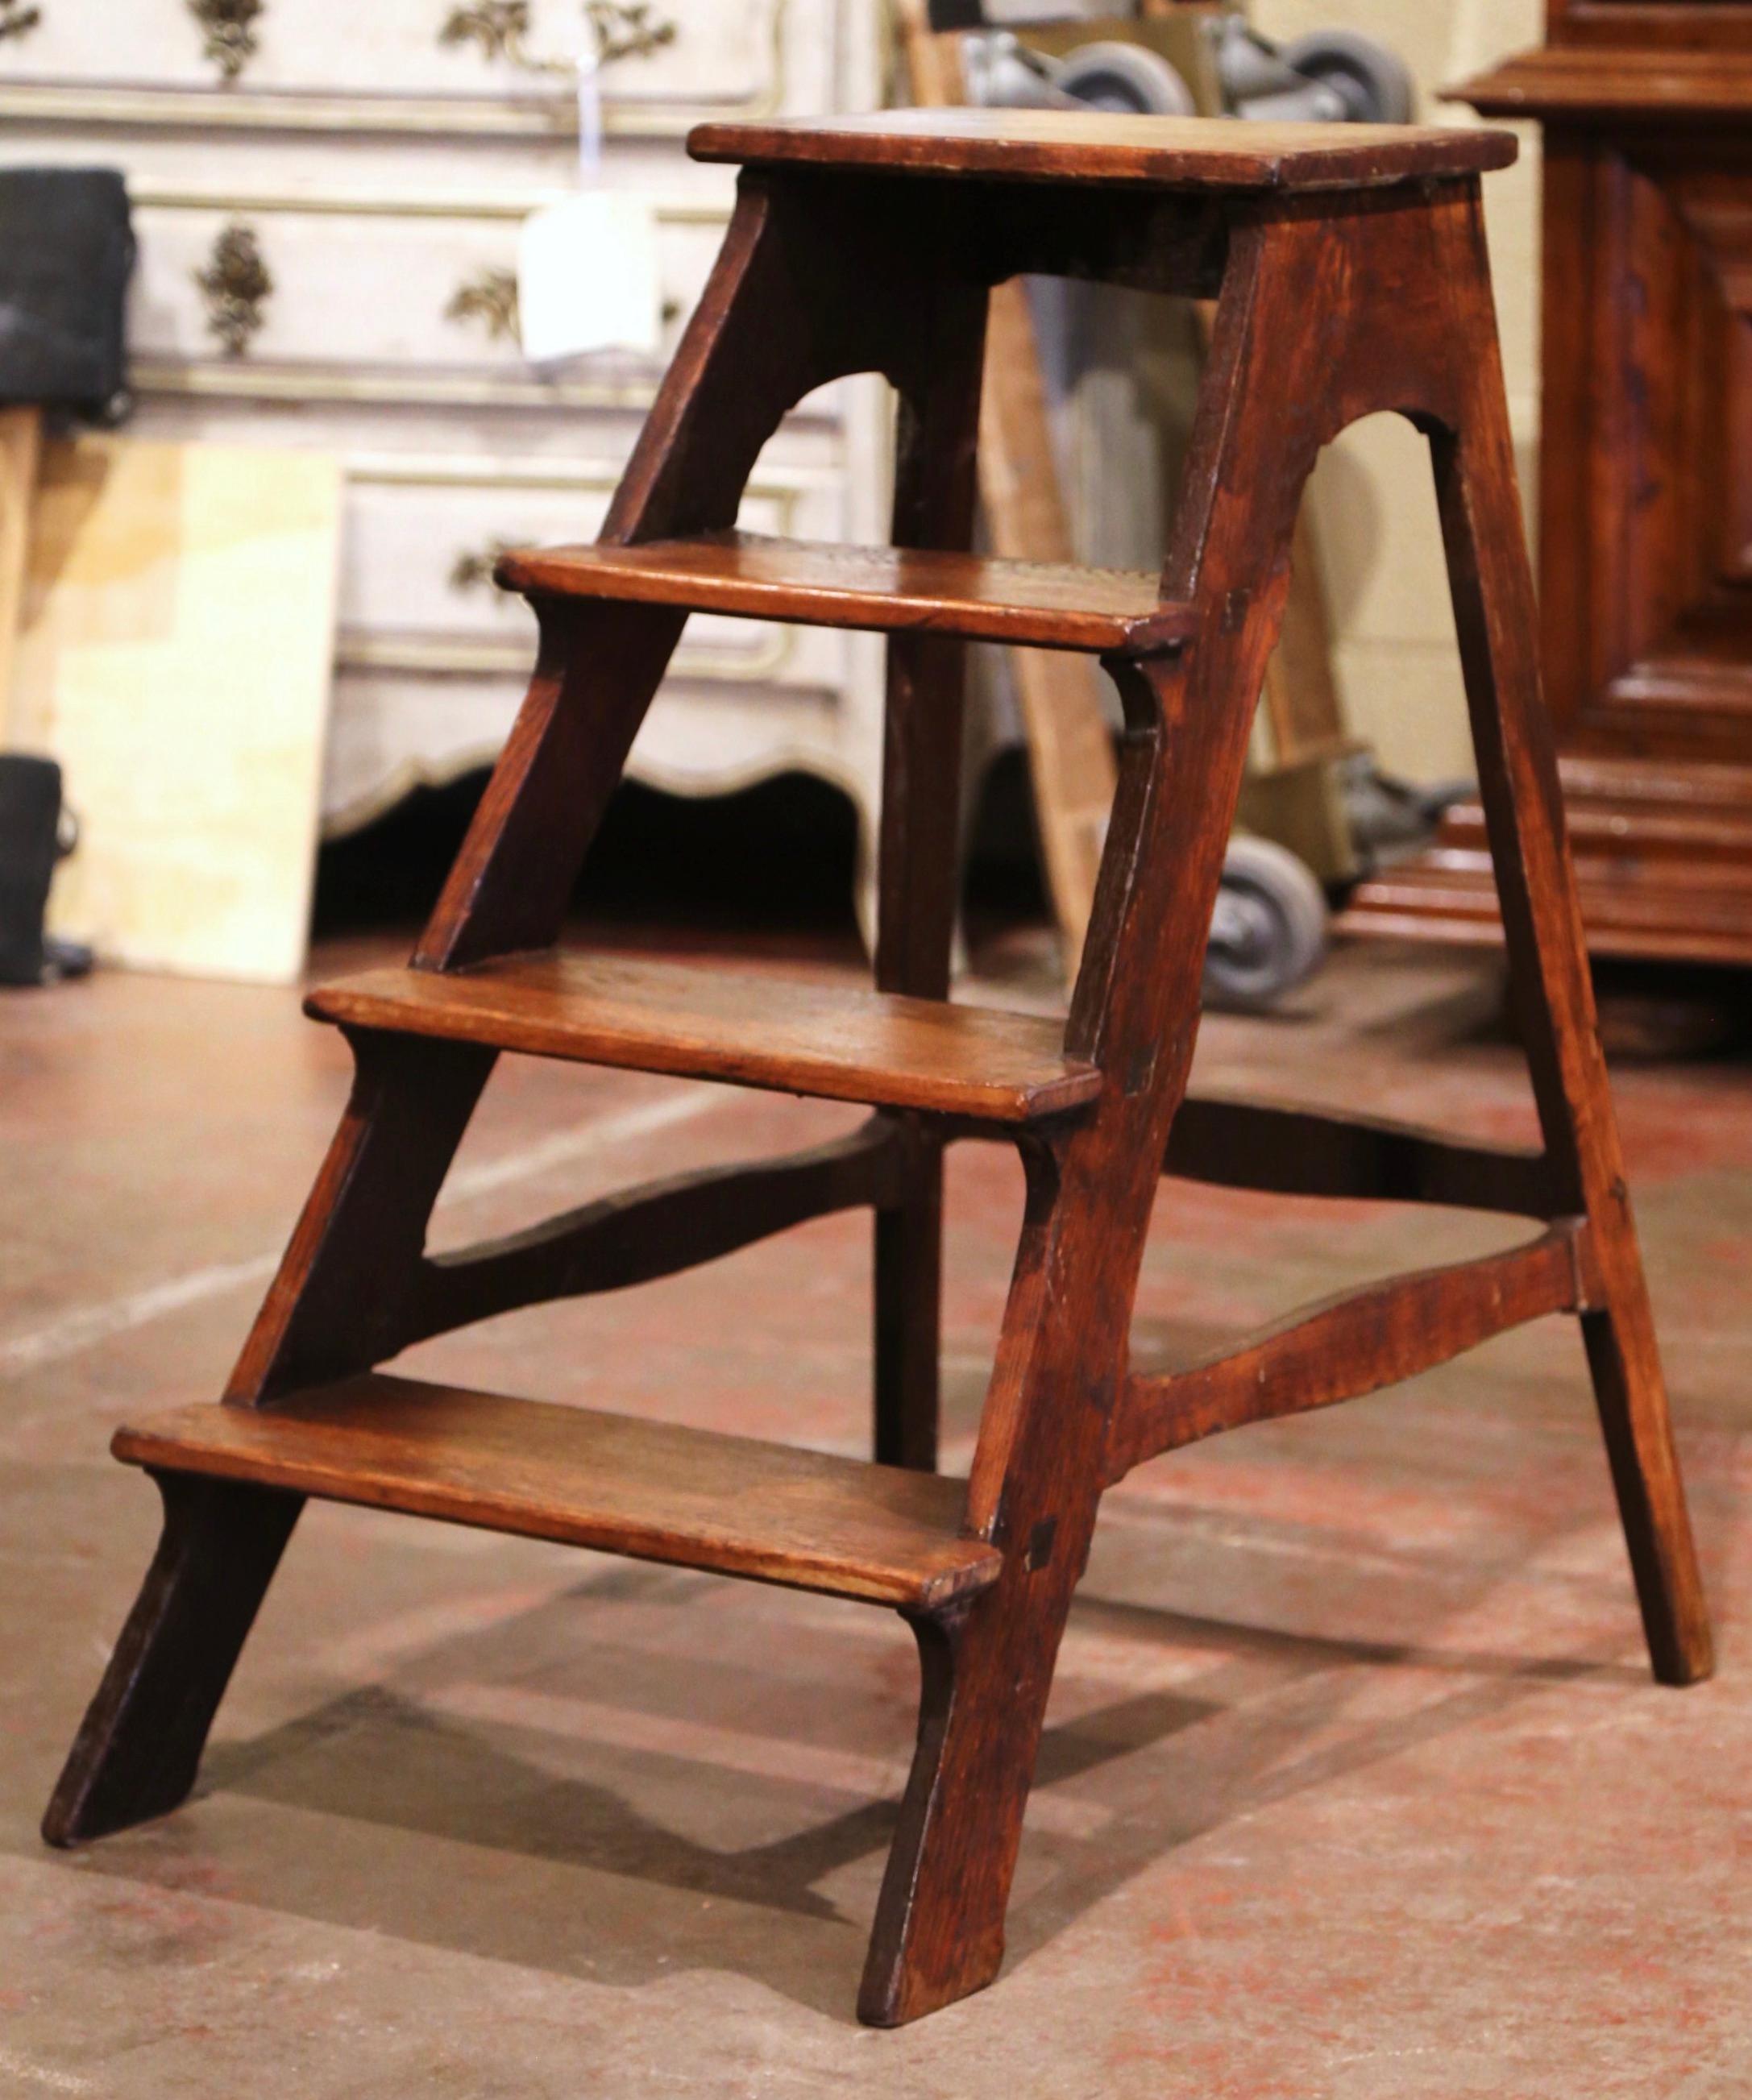 This elegant antique step ladder was created in France, circa 1850. Carved of solid oak, the sturdy ladder features four steps including a wider and deeper step at the top. Practical and useful, the rustic ladder is in excellent condition